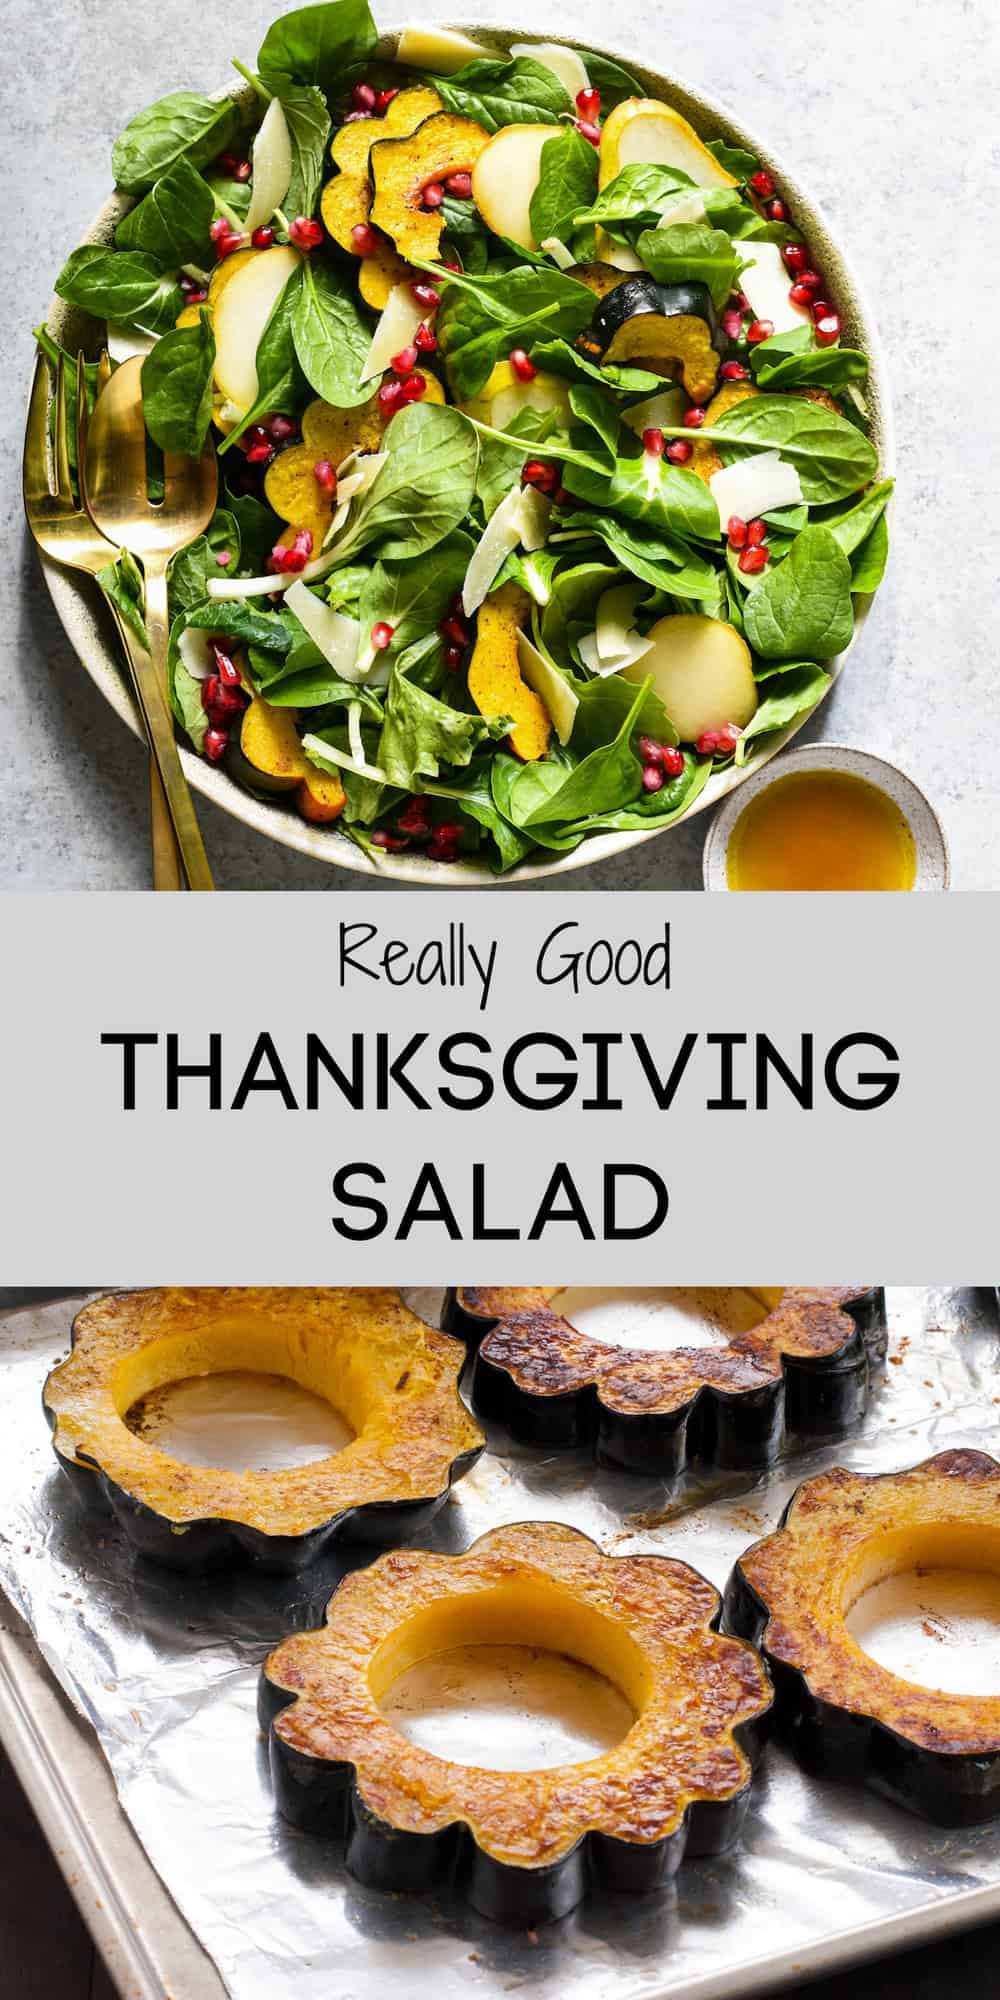 Collage of images of Thanksgiving salad and roasted acorn squash with overlay: Really Good THANKSGIVING SALAD